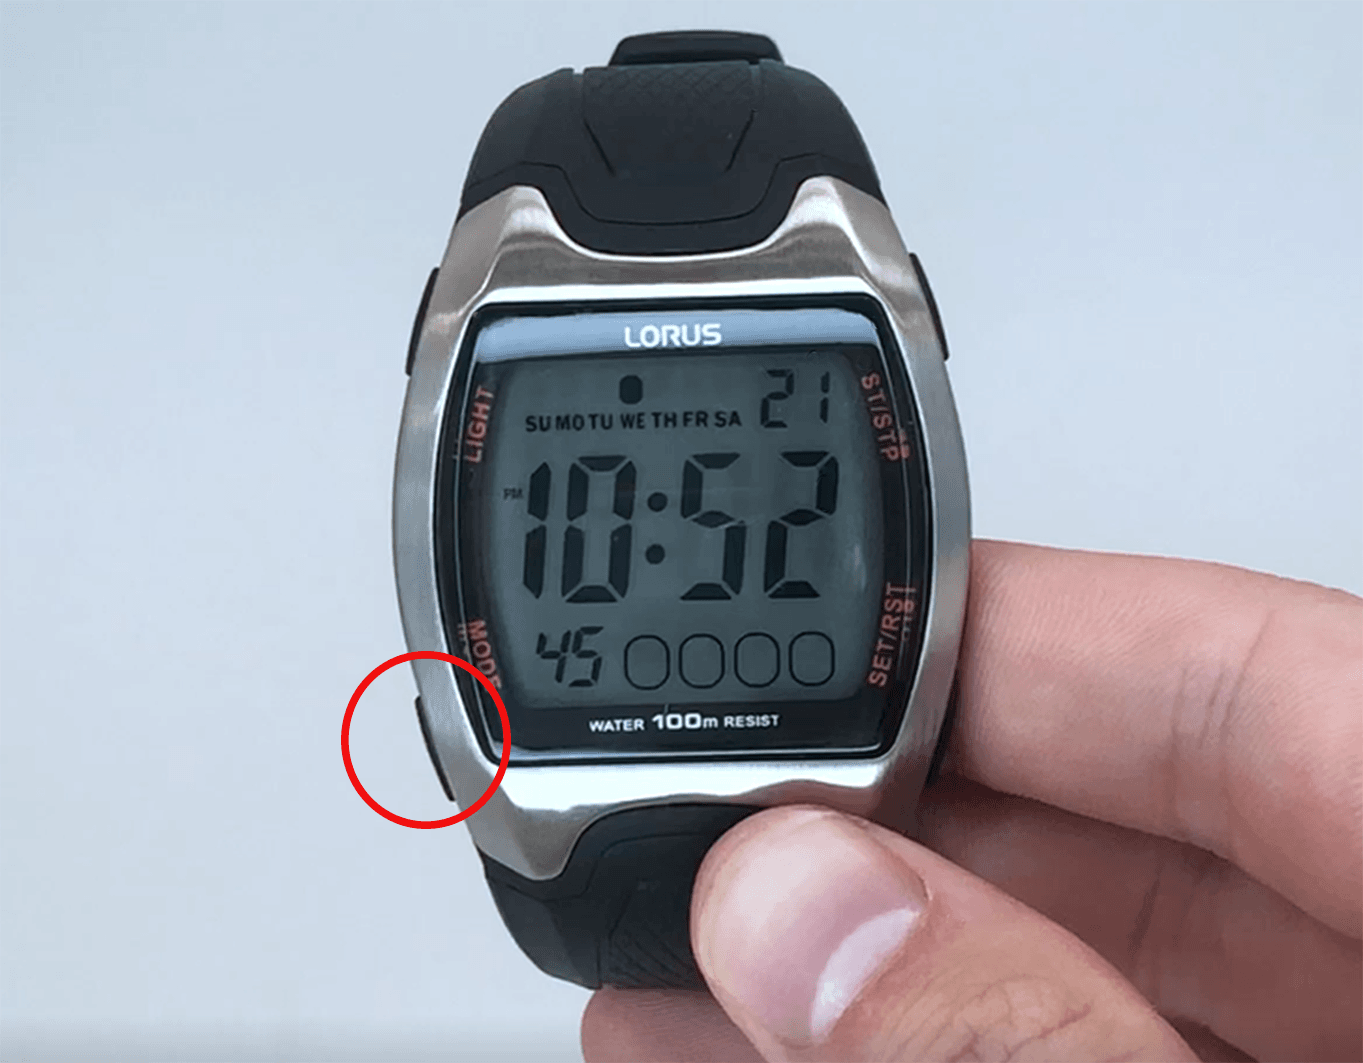 How To Change The Time On A Lorus Digital Watch | Watch Depot